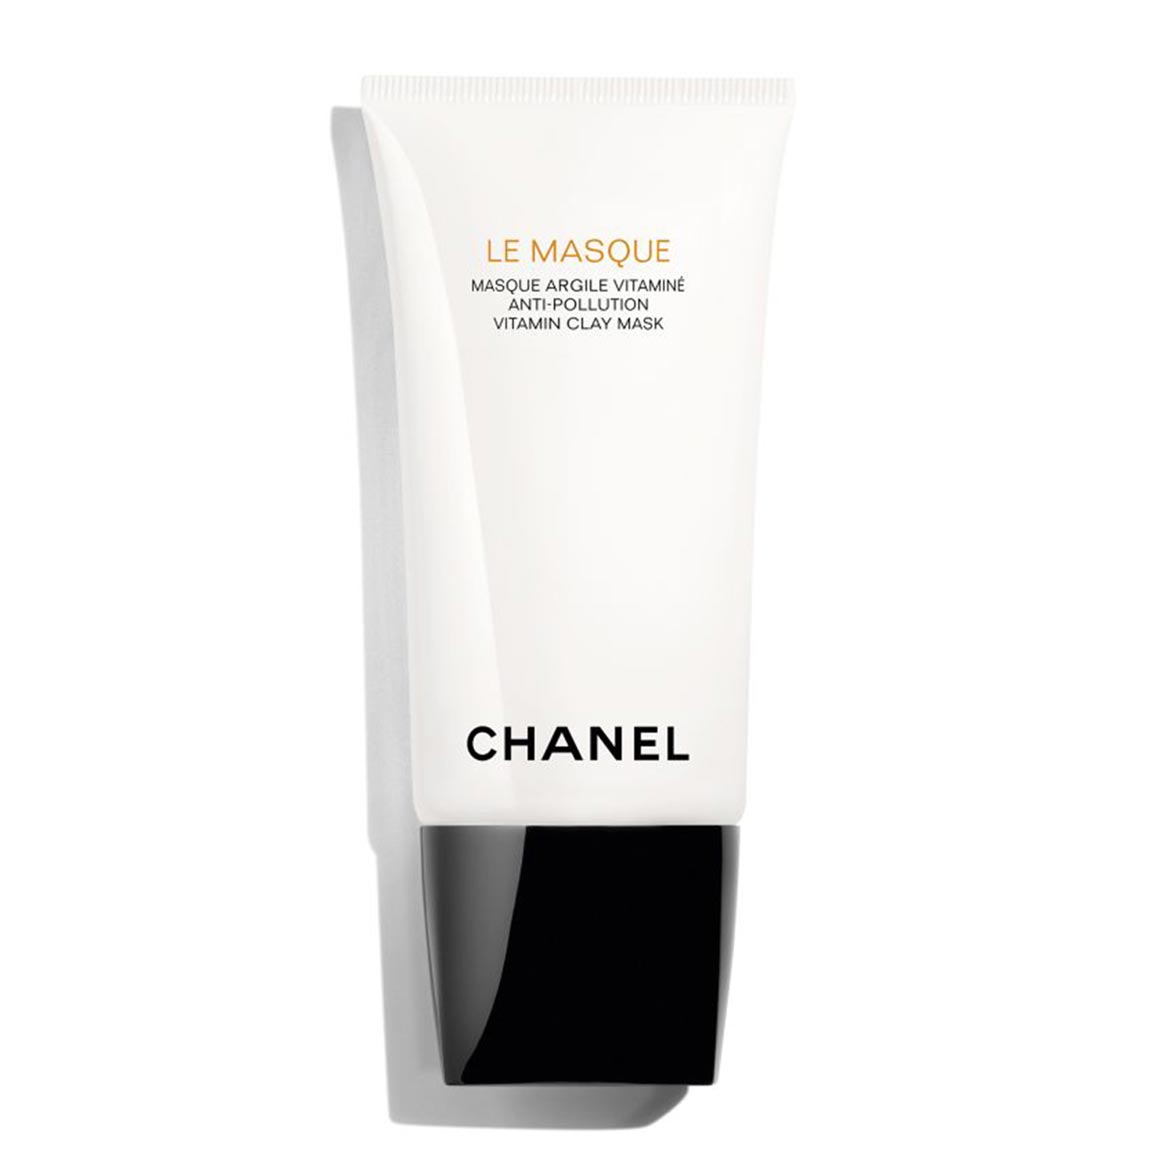 CHANEL LE MASQUE Anti-Pollution Vitamin Clay Mask | Woolworths.co.za